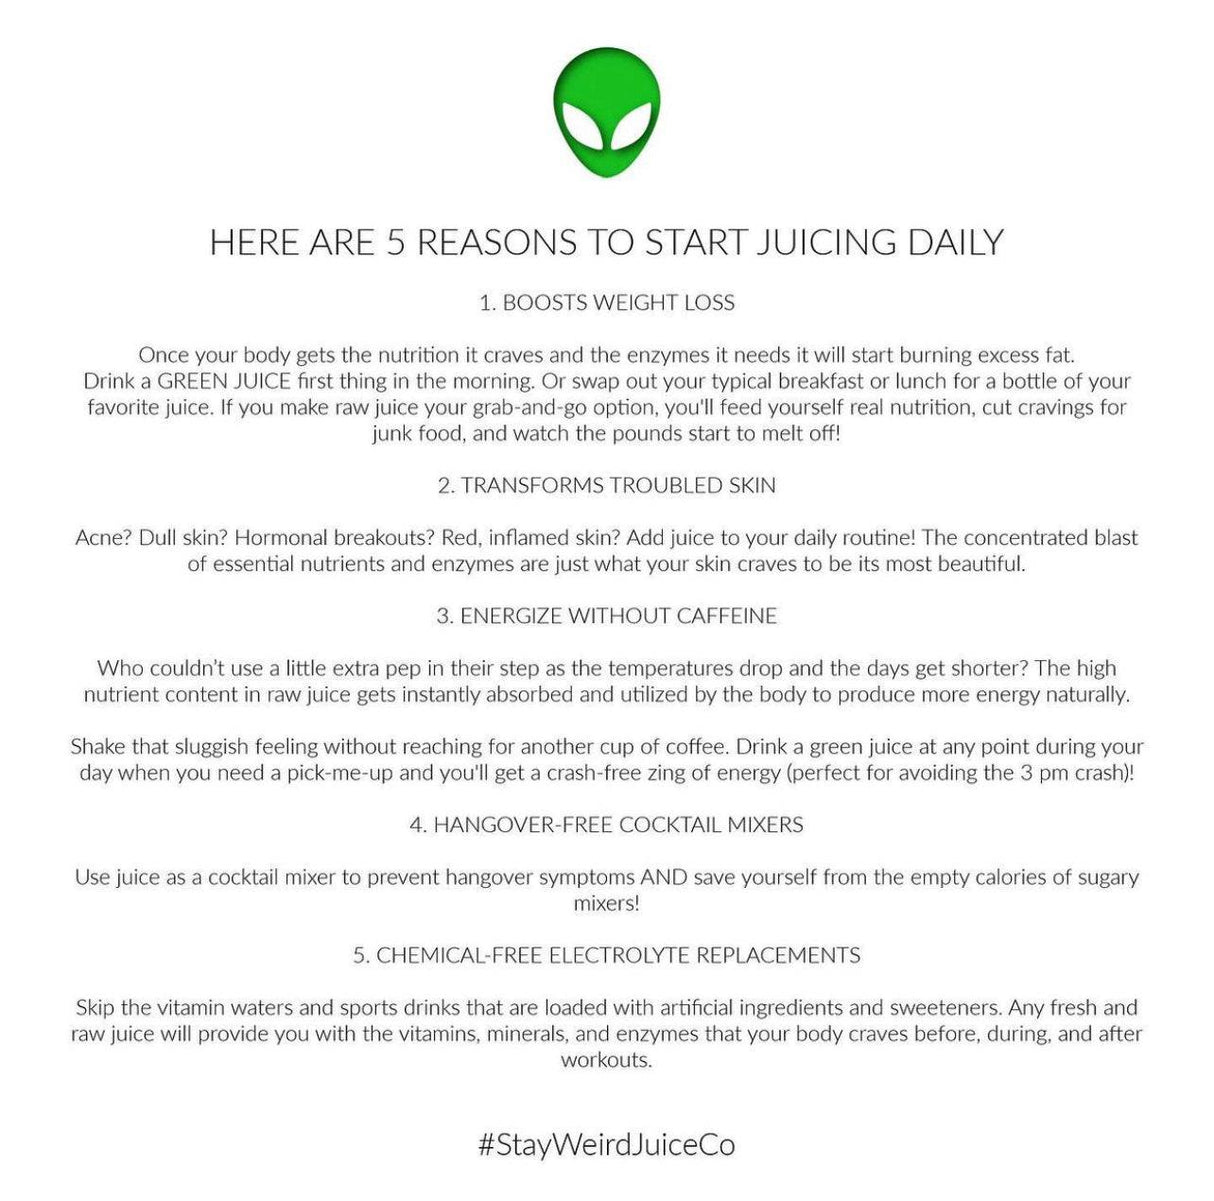 Stay Weird Juice Co - Prime Sports Nutrition